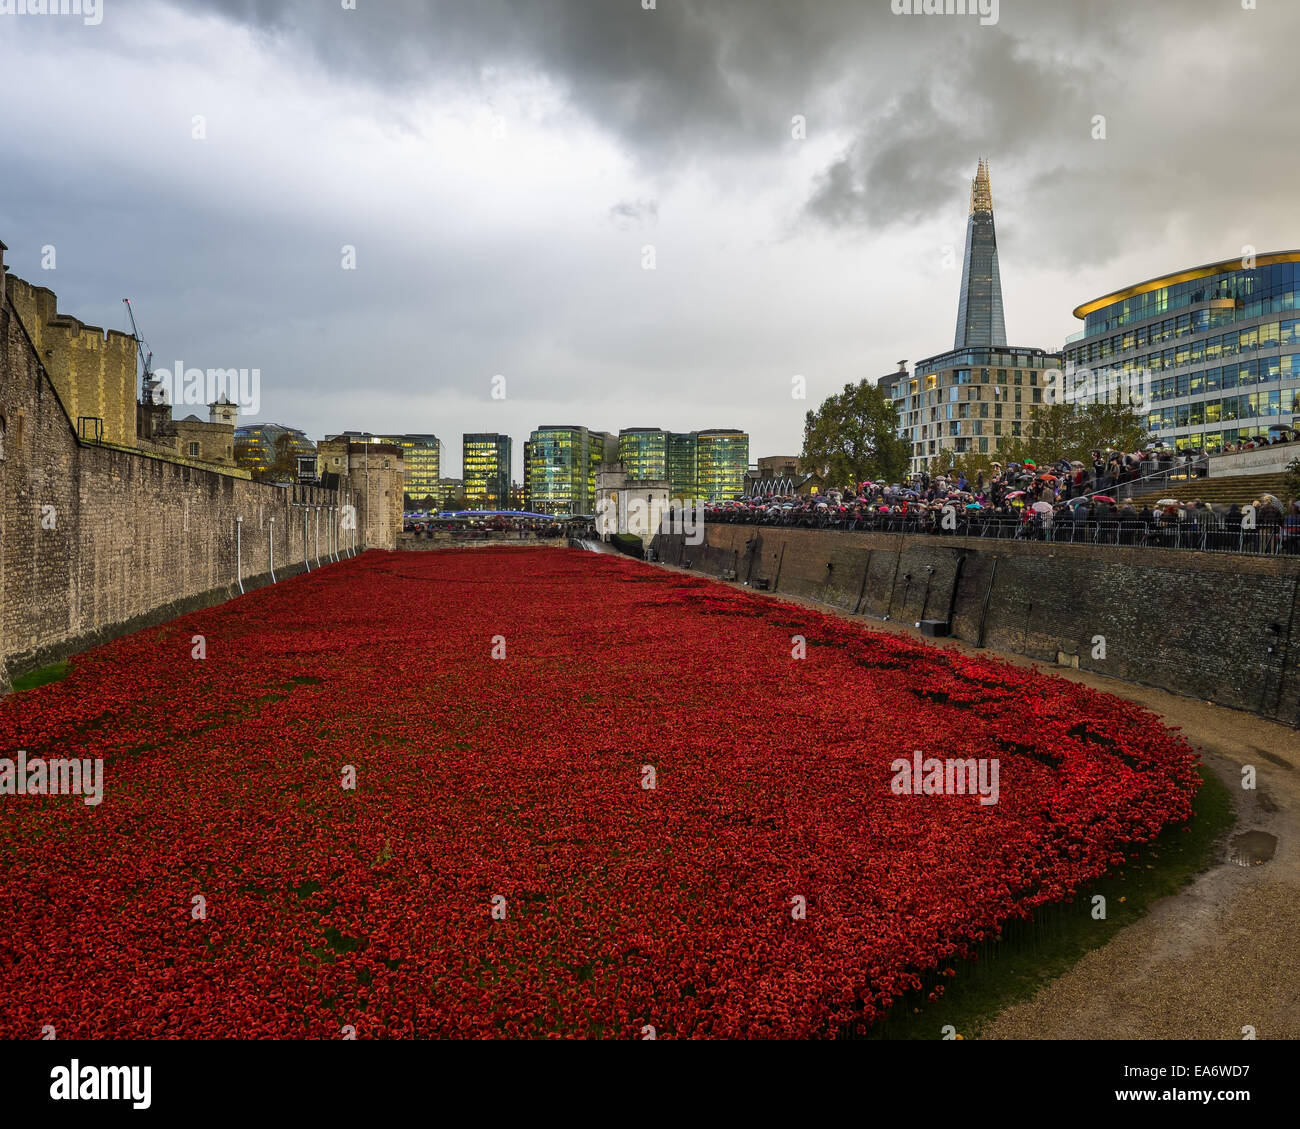 Poppy display at the Tower of London for the 2014, The Shard in the background. Stock Photo